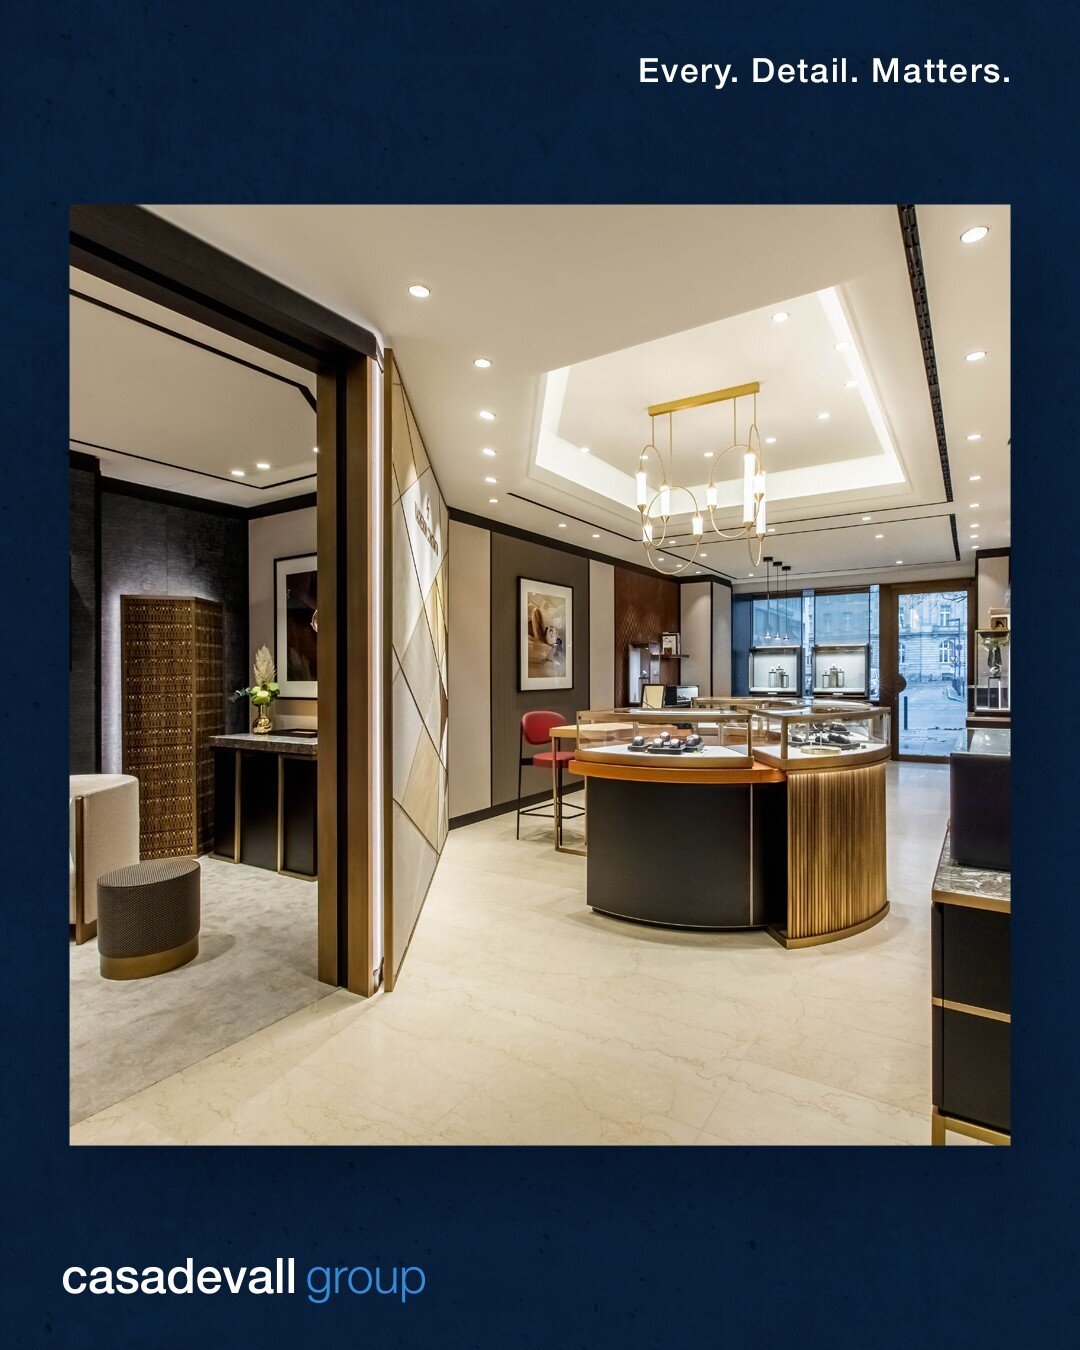 This Vacheron boutique is breathtaking 🙌
What's your favorite detail in this store? Let us know in the comments 👇
.
.
.
#EveryDetailMatters #luxurydisplays #luxurymillwork #luxurypackaging #highenddisplay #attentiontodetail #details #luxury #highen